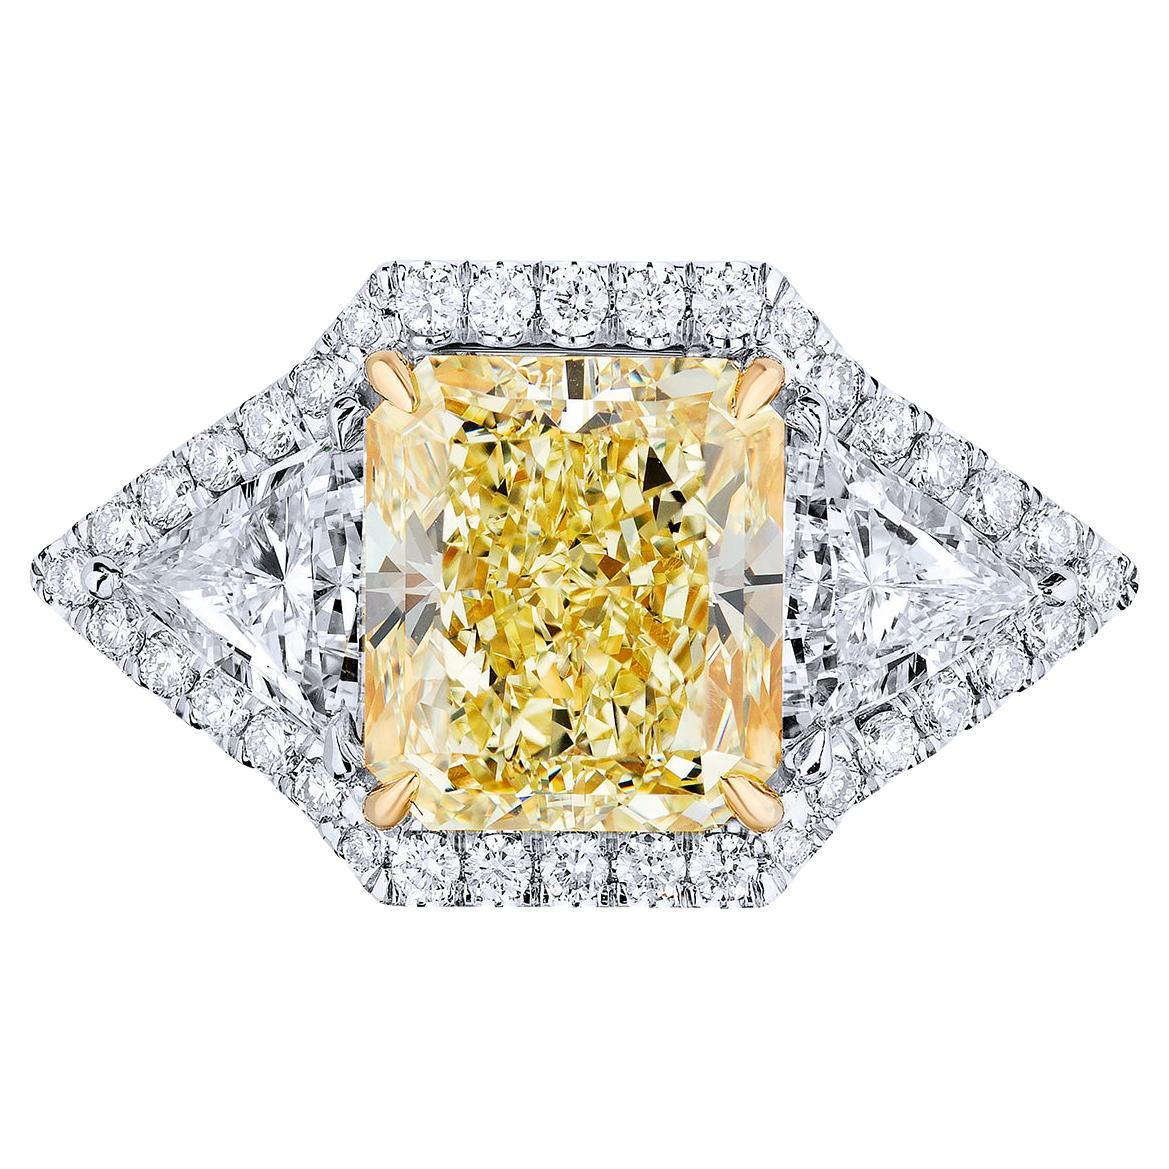 GIA Certified 5.02 Carat Radiant Yellow Diamond Ring For Sale